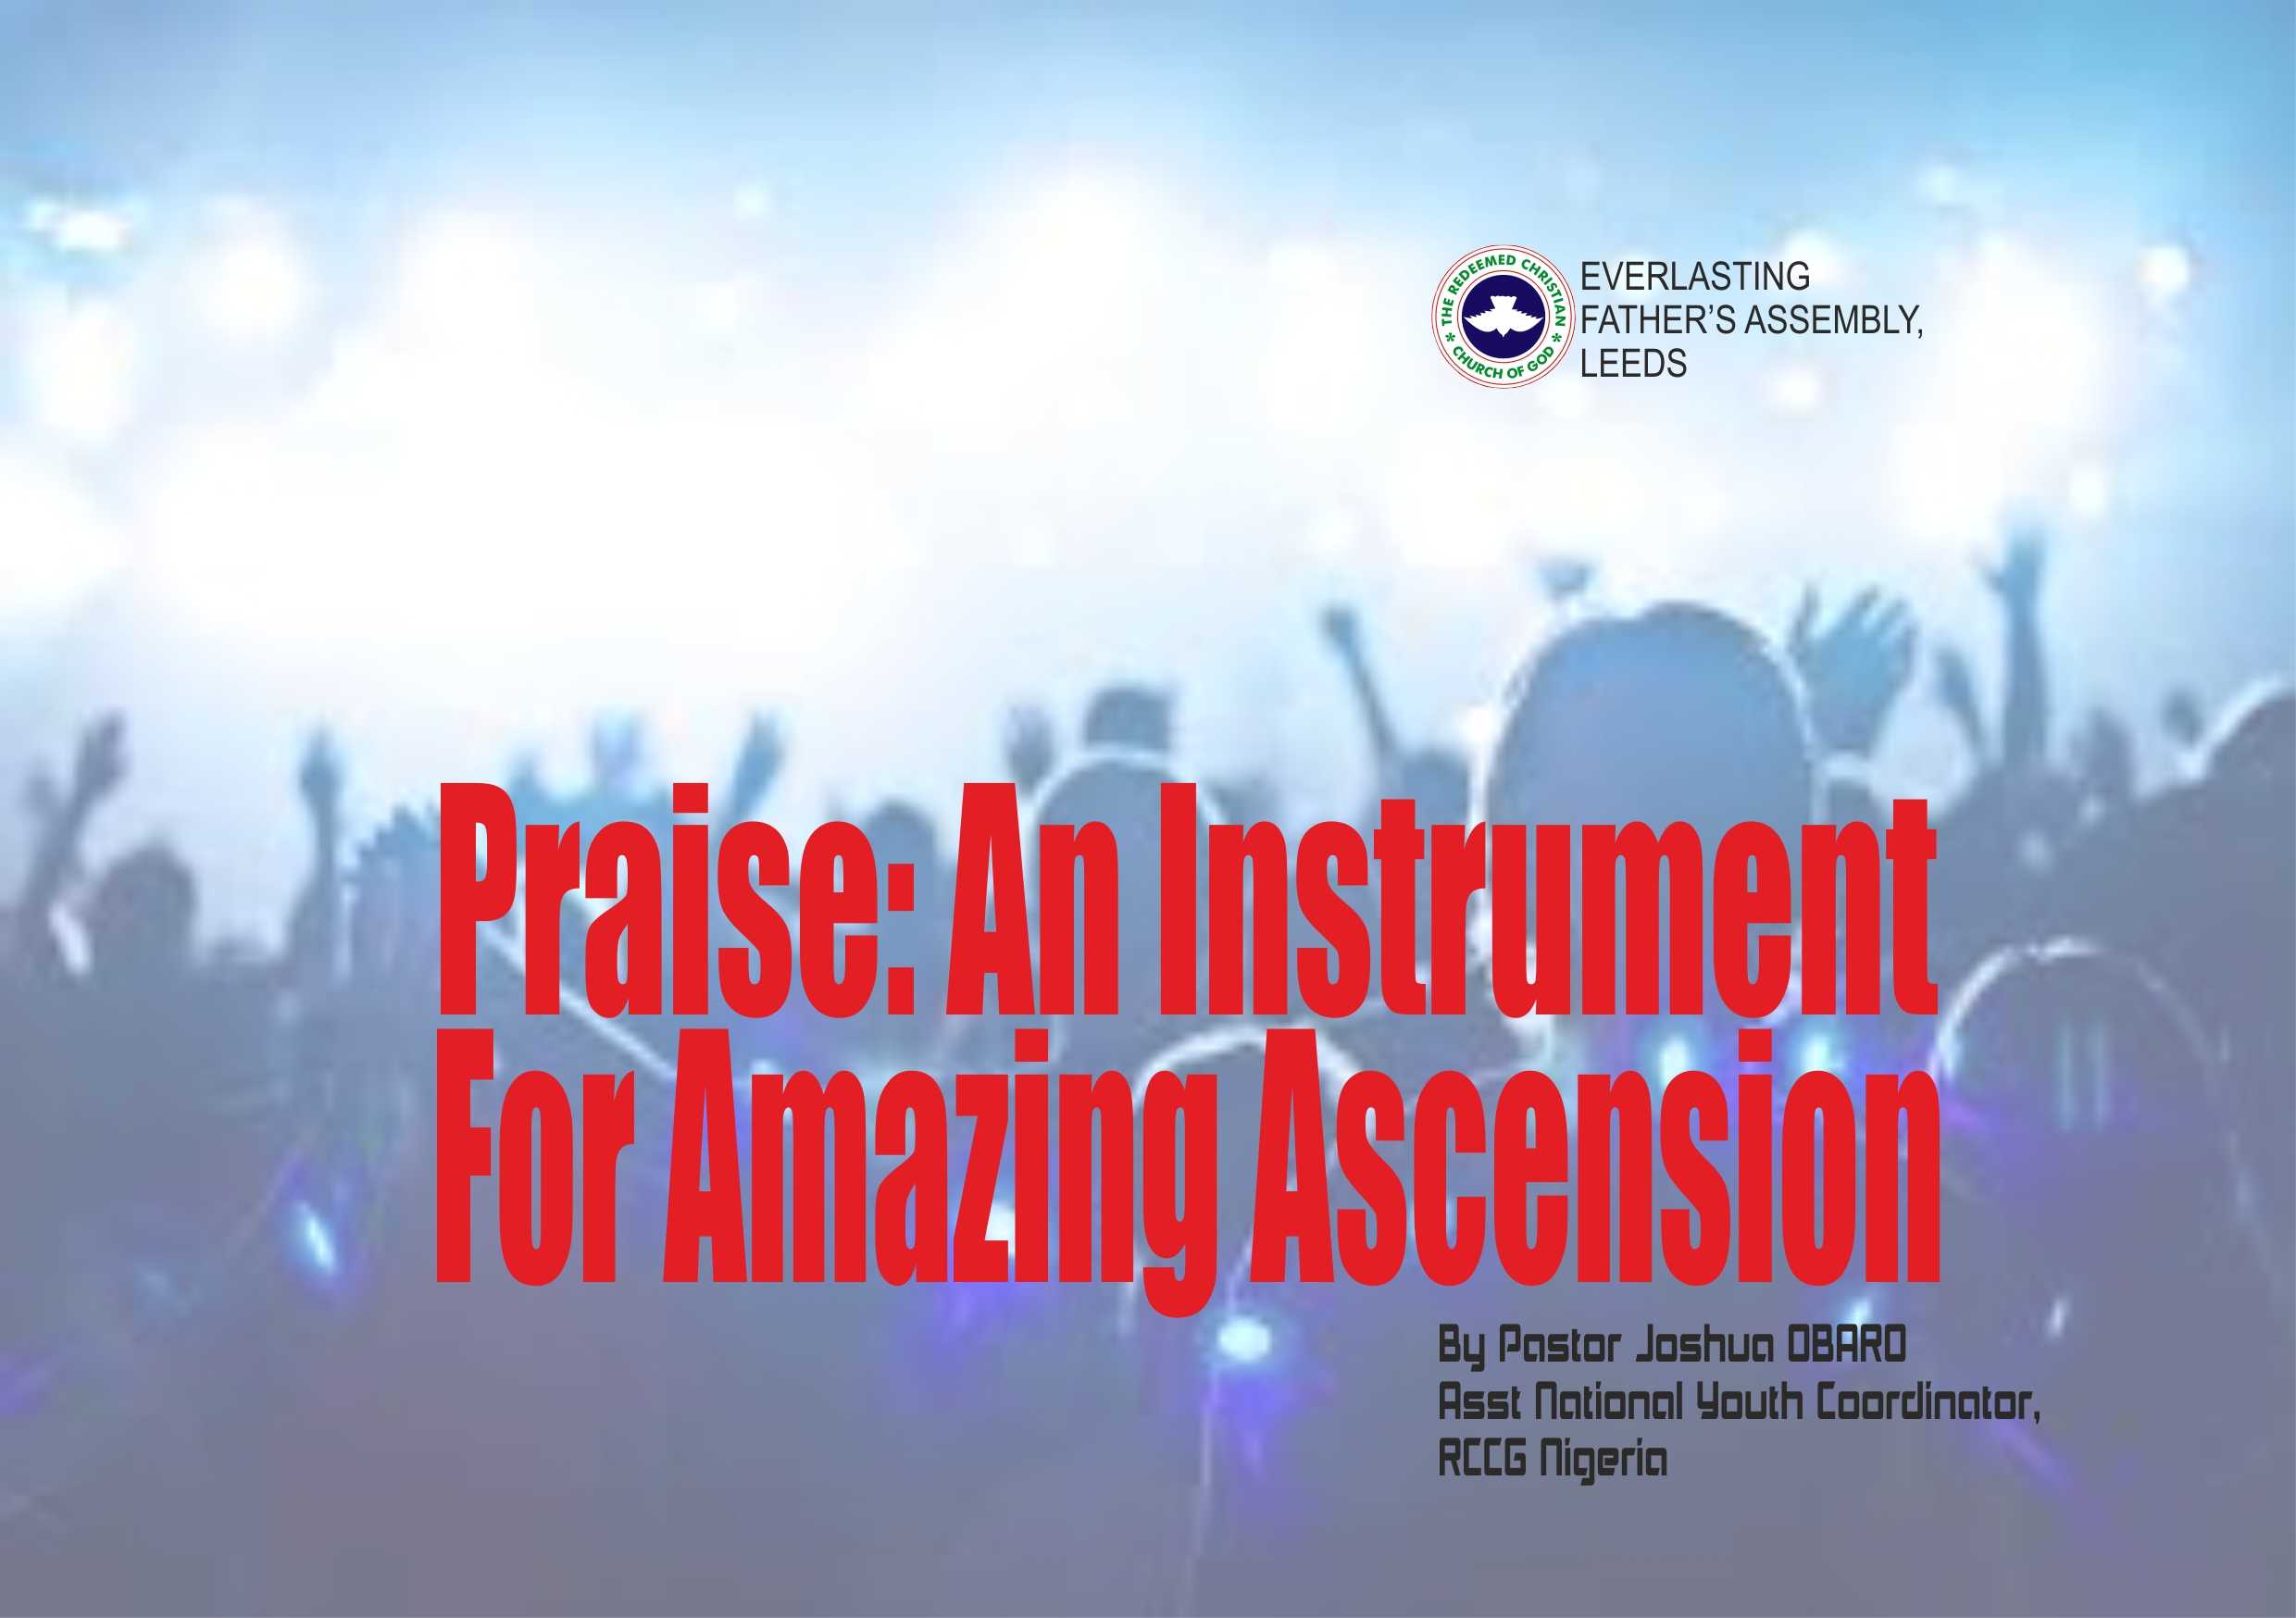 Praise: An Instrument For Amazing Ascension, by Pastor Joshua Obaro